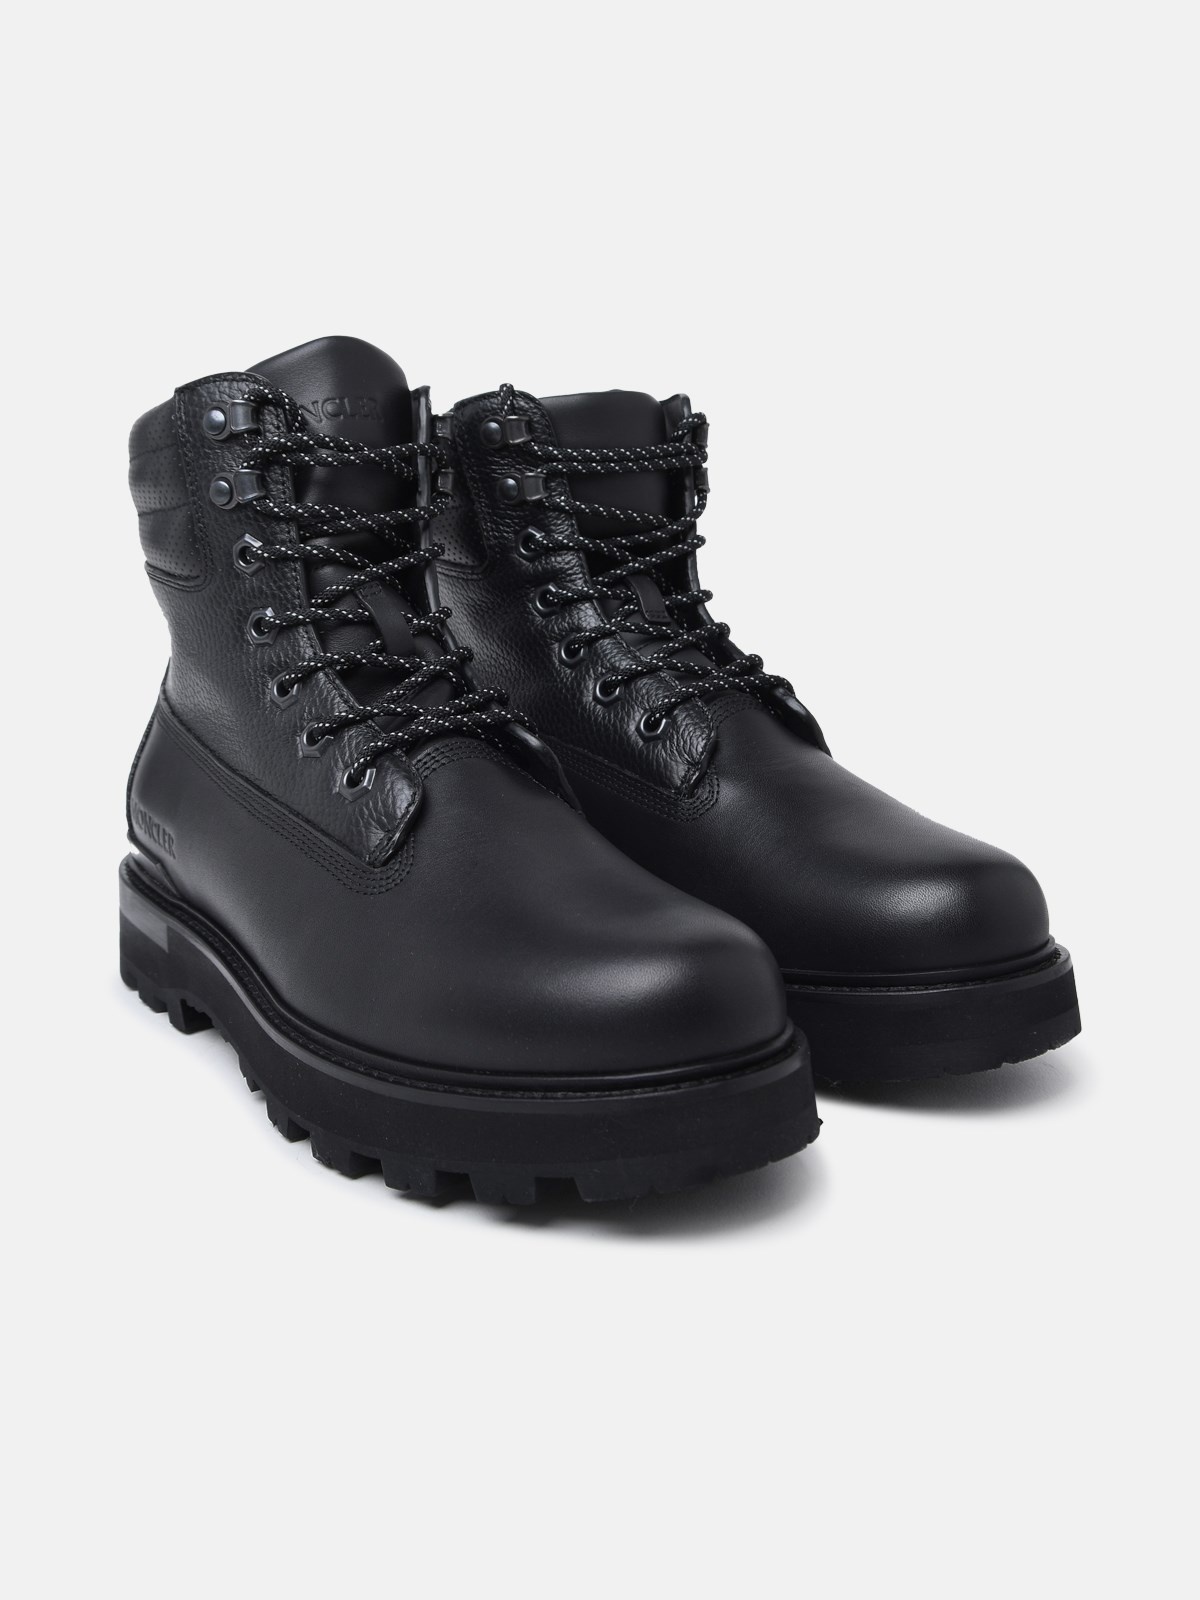 PEKA BLACK LEATHER LACE-UP BOOTS - 2